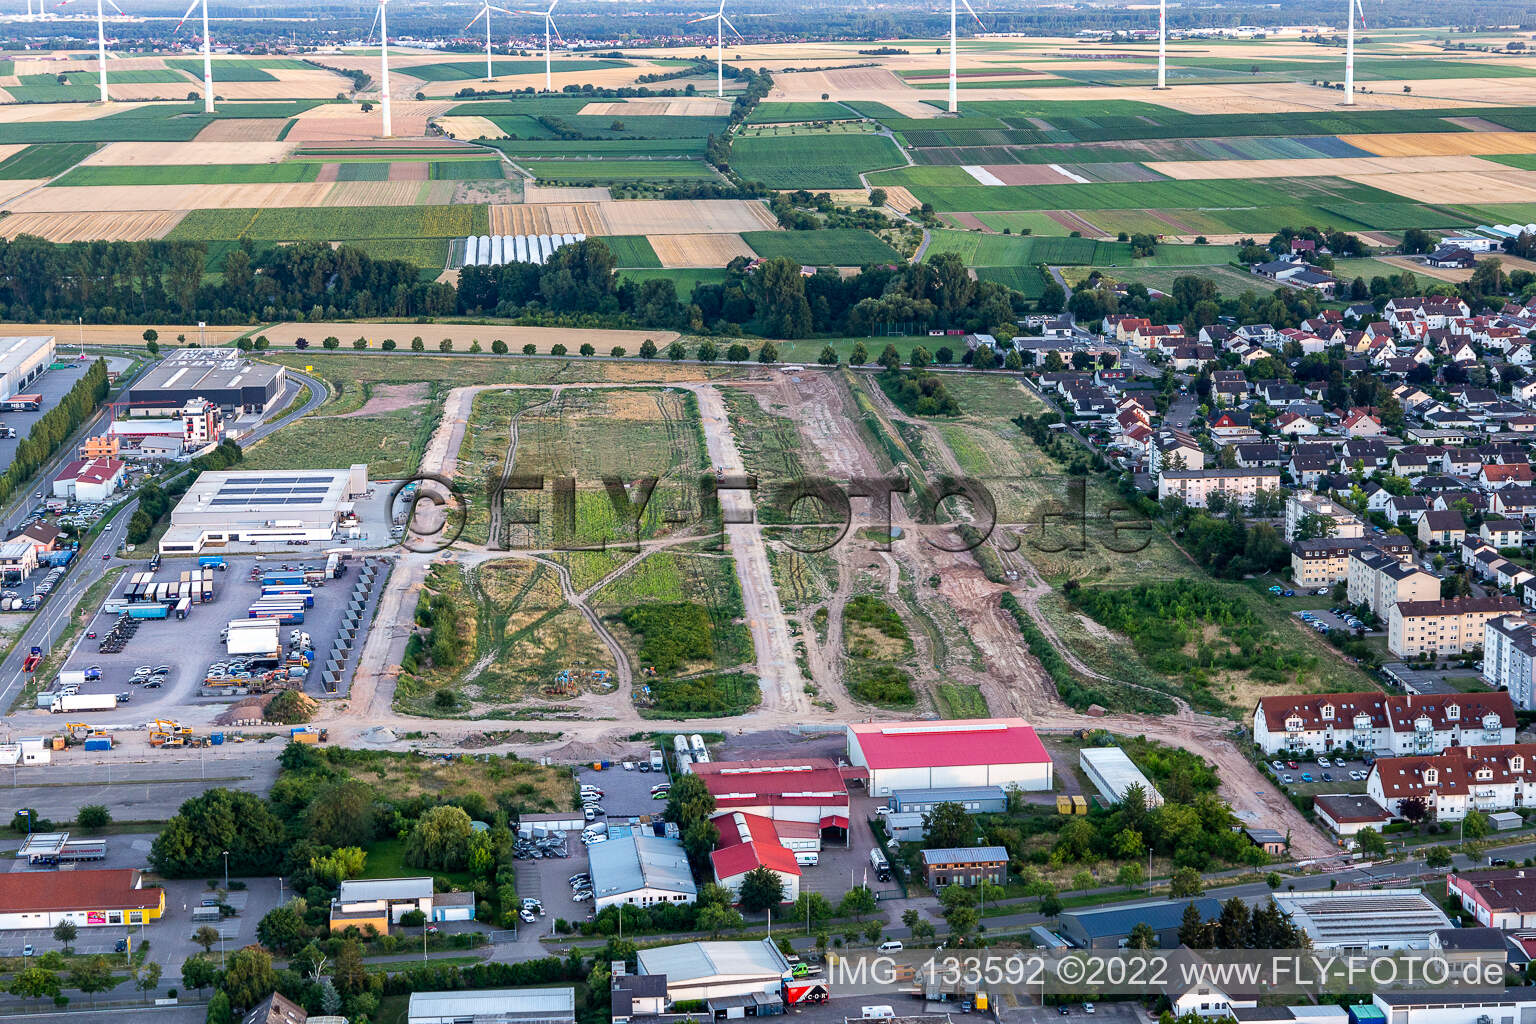 Interpark business park expansion area in Offenbach an der Queich in the state Rhineland-Palatinate, Germany